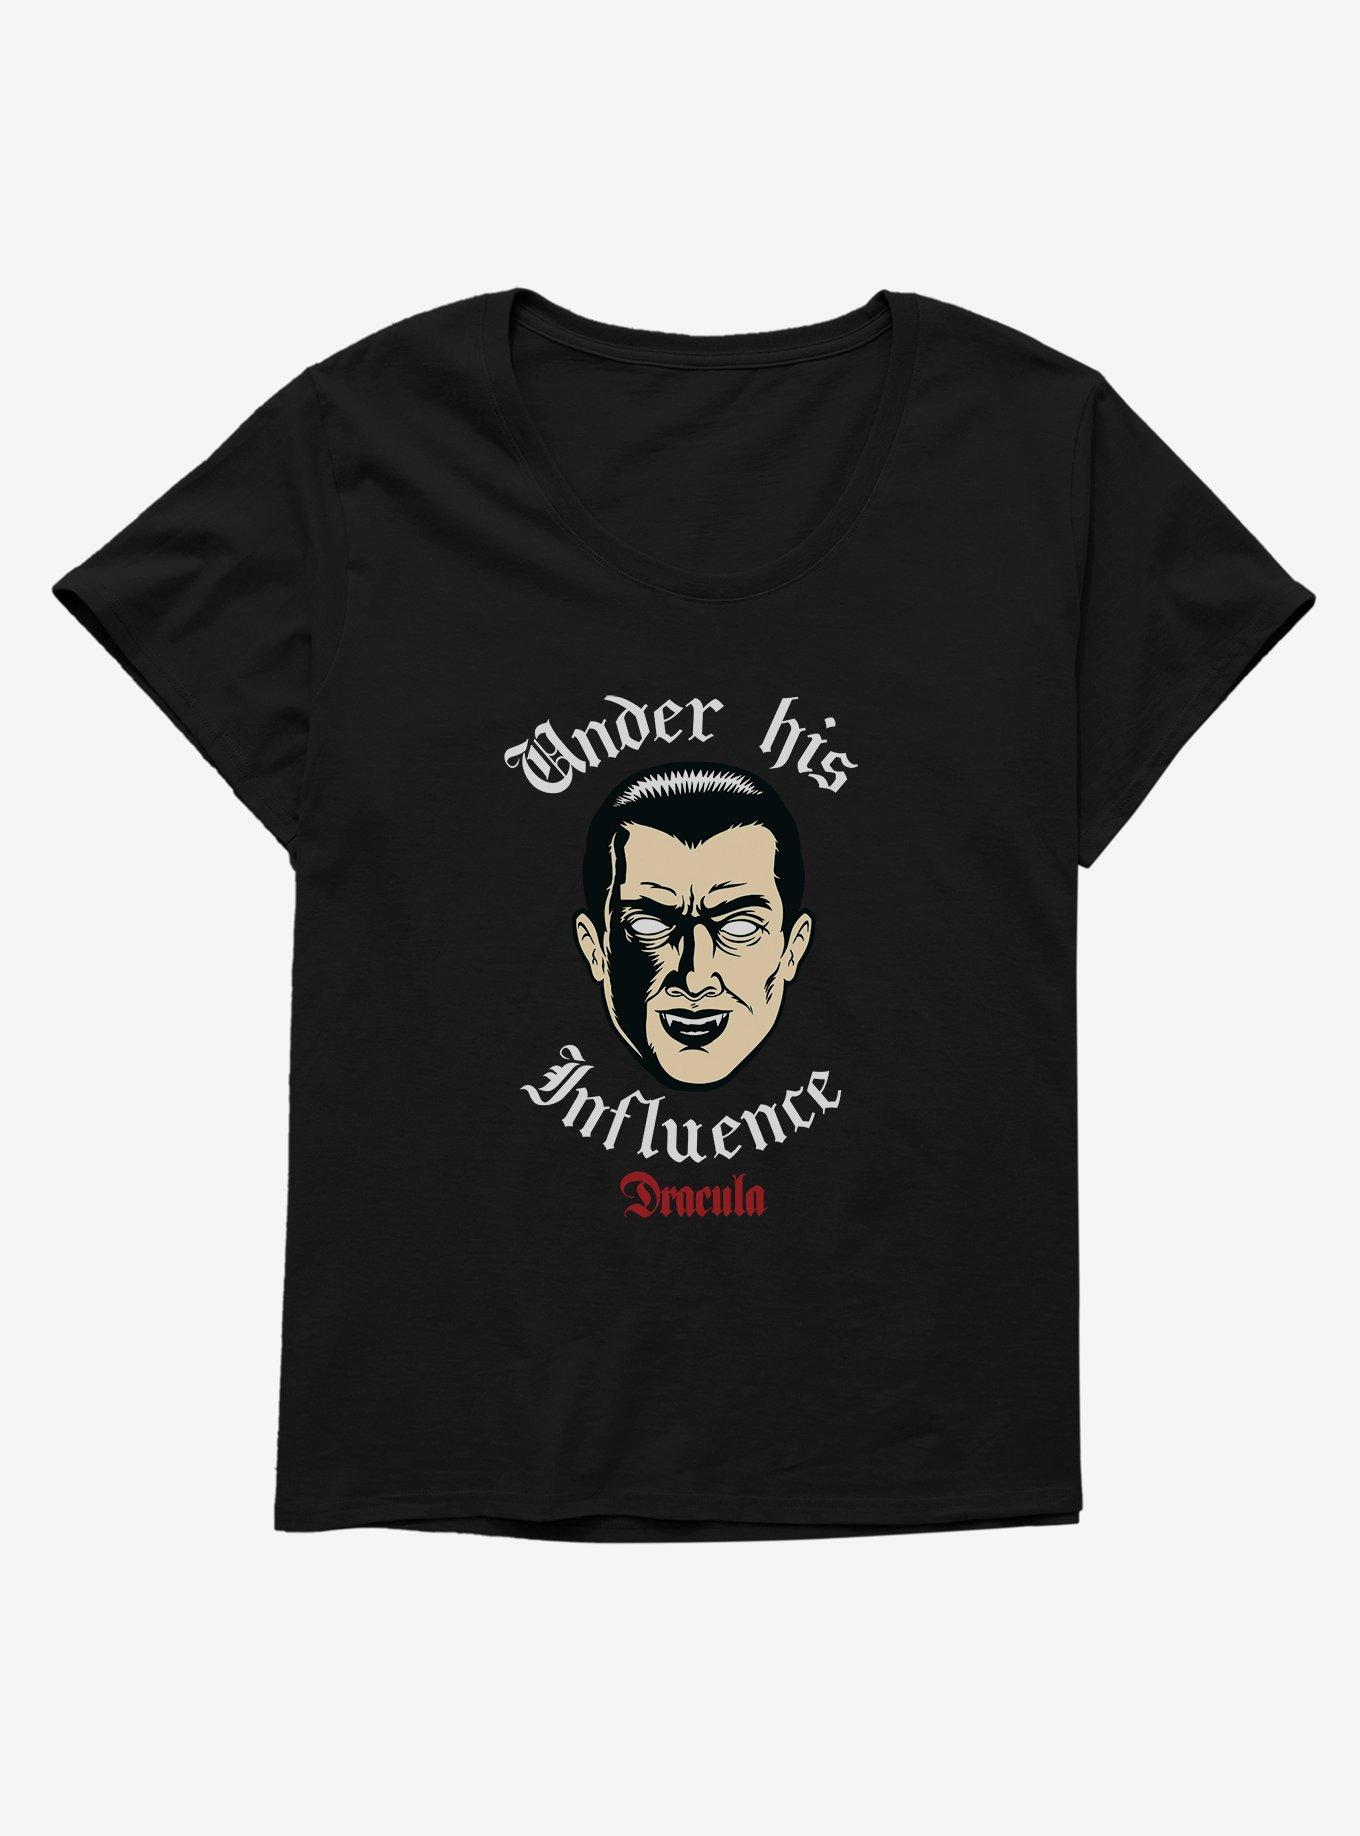 Universal Monsters Dracula Under His Influence Girls T-Shirt Plus Size, BLACK, hi-res